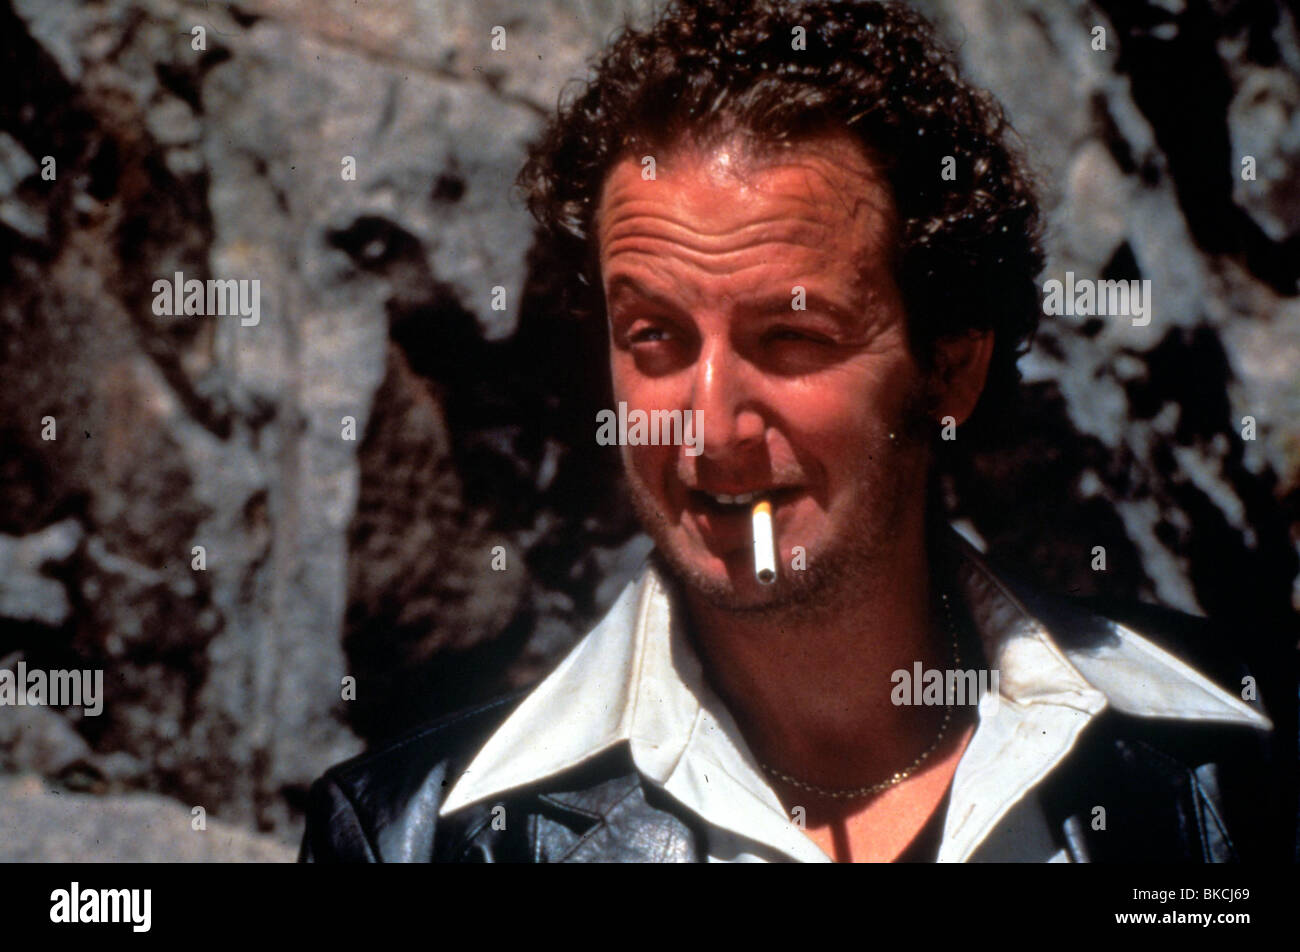 Daniel Stern smoking a cigarette (or weed)
